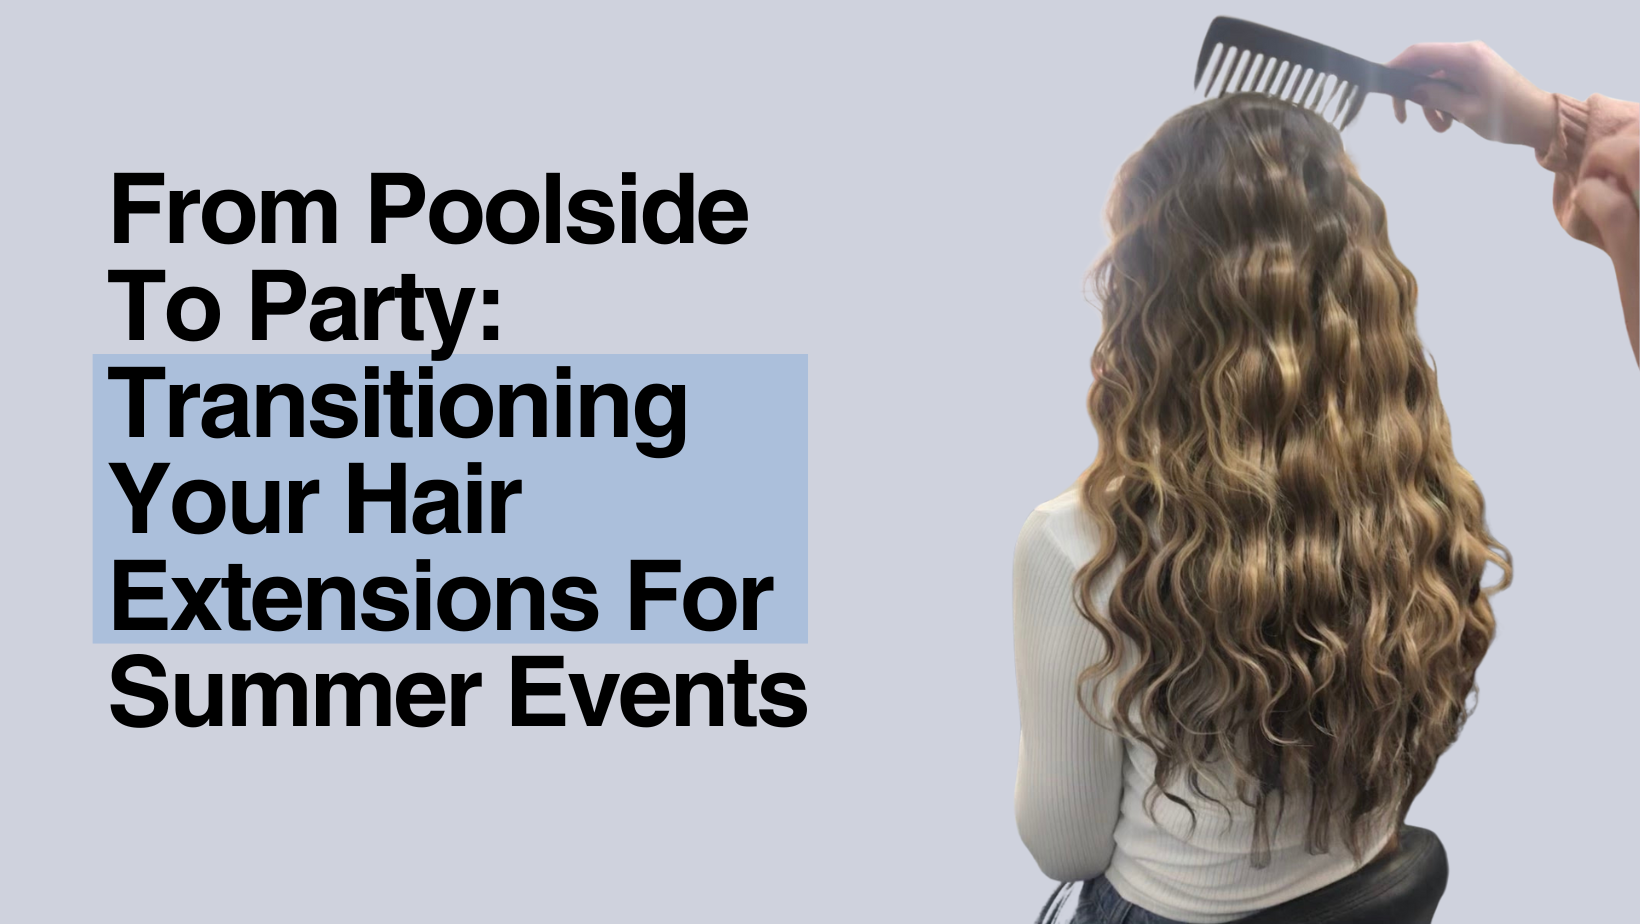 From Poolside to Party: Transitioning Your Hair Extensions for Summer Events